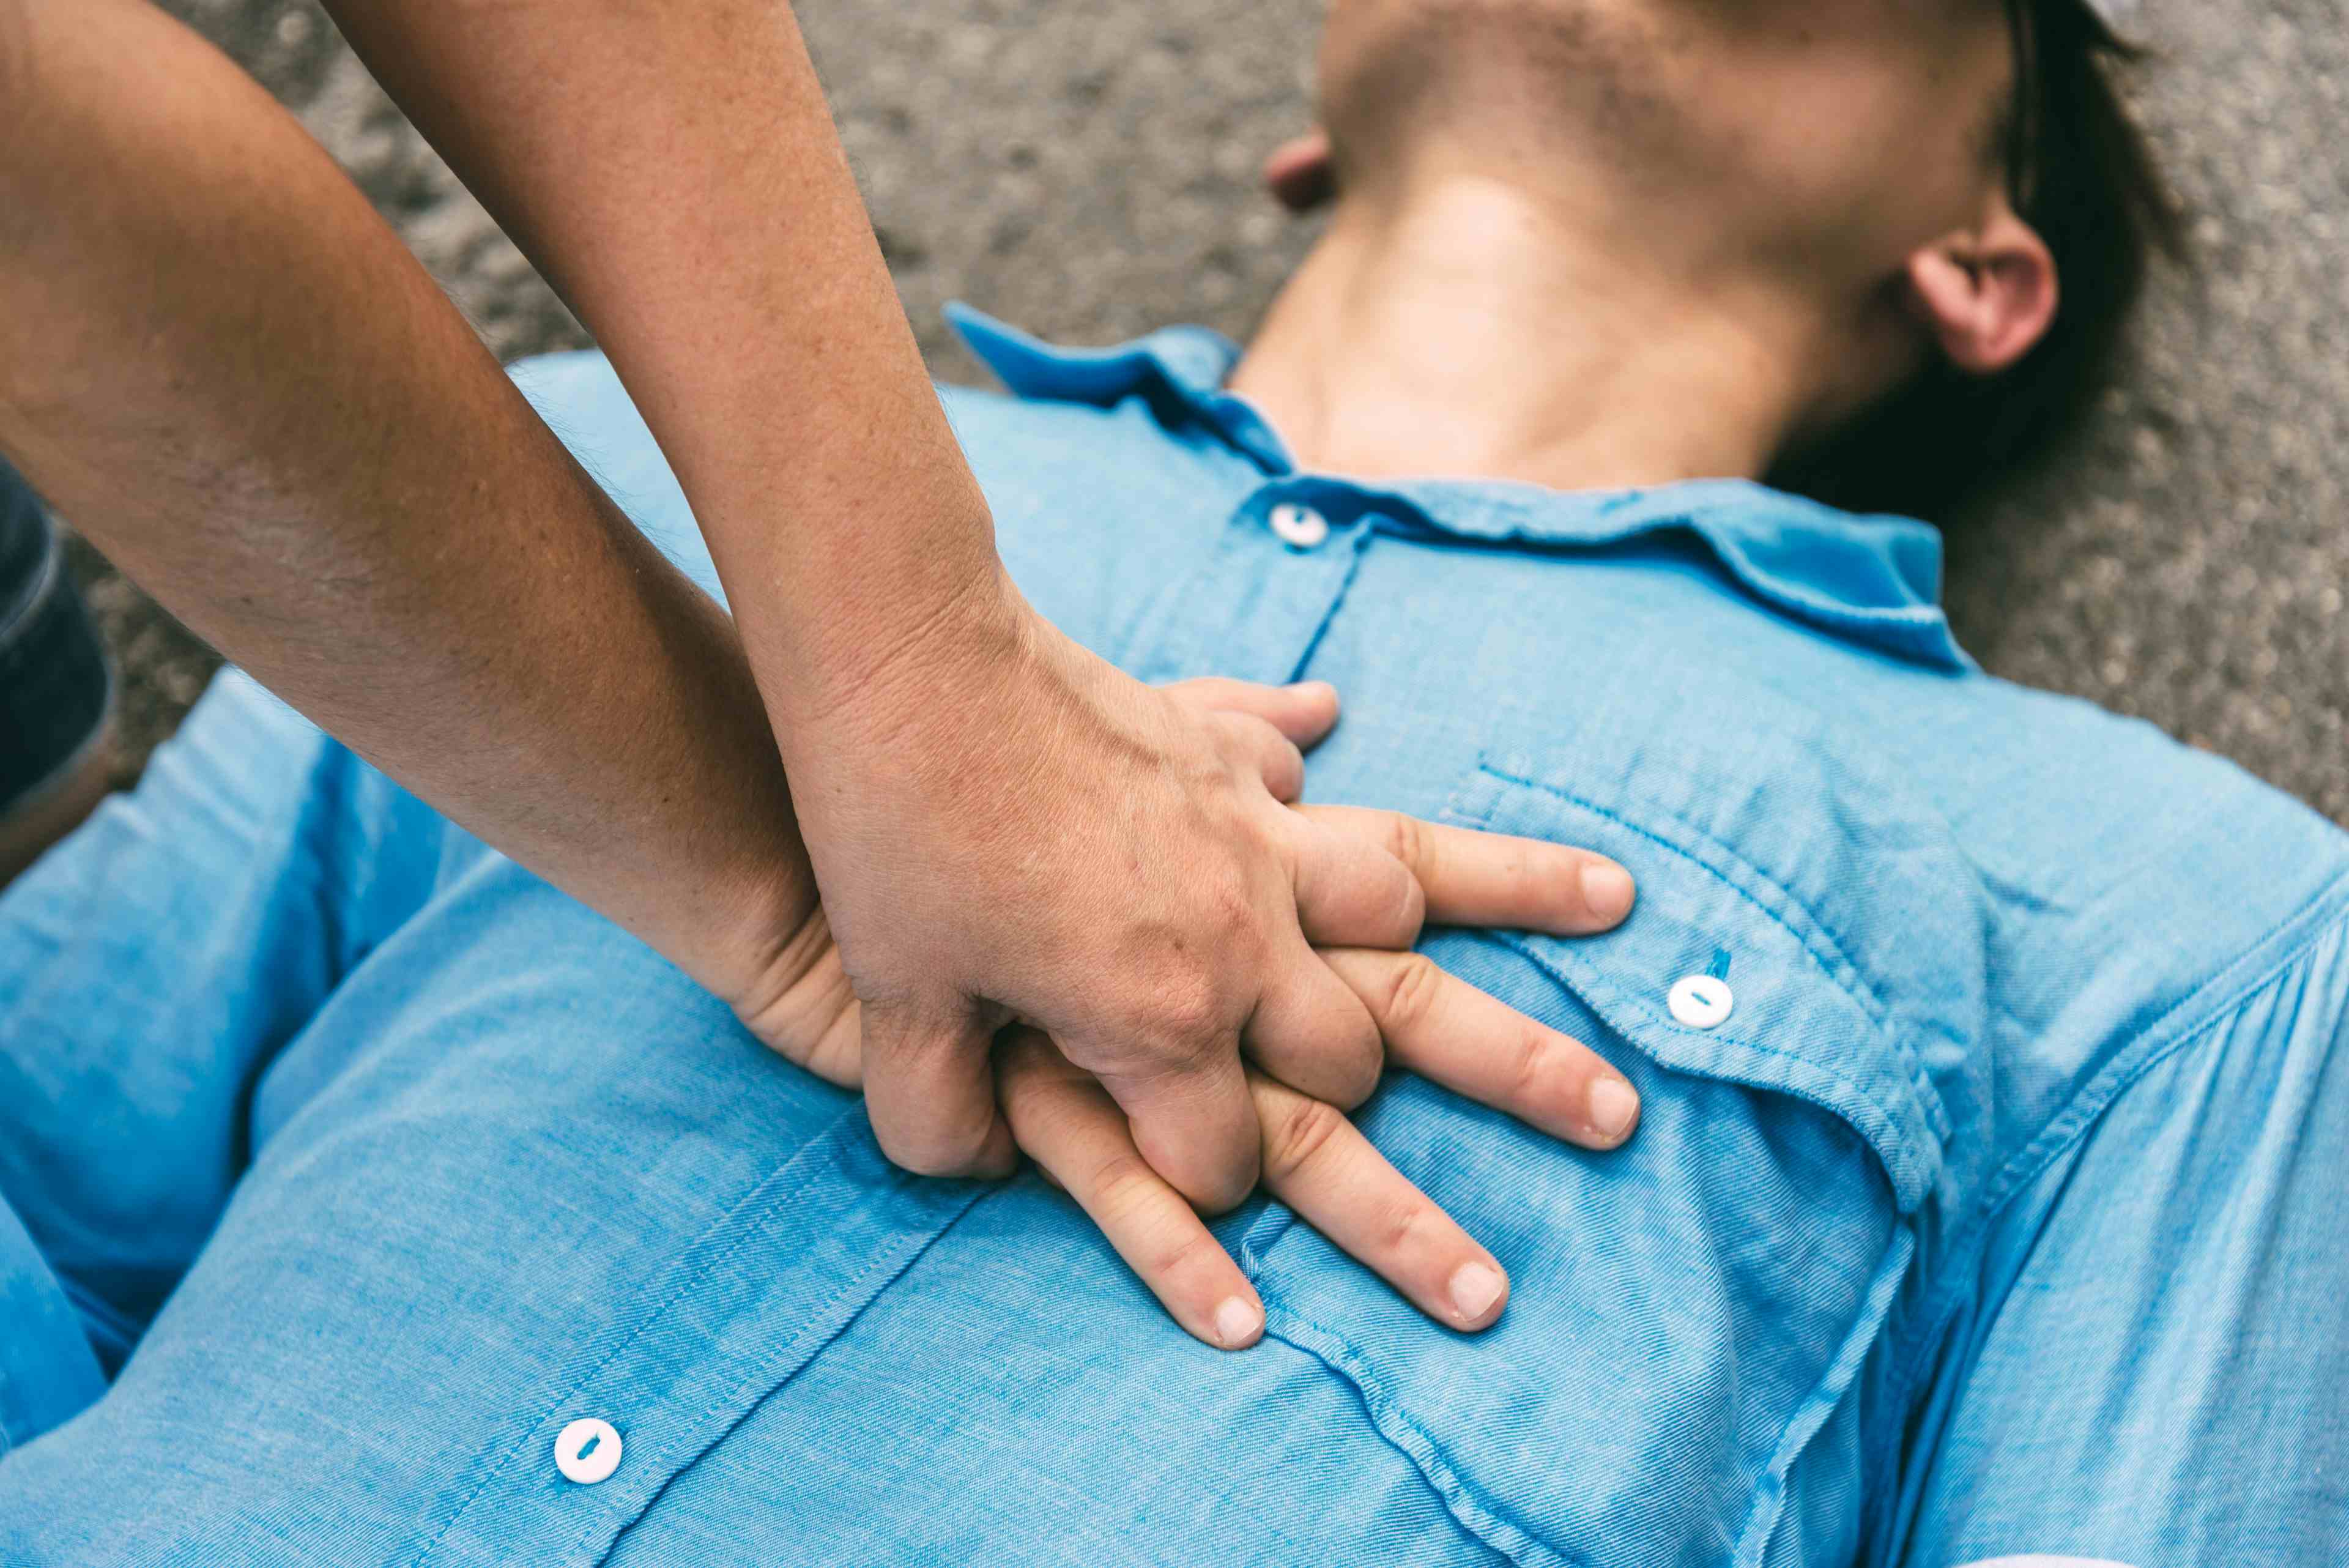 Emergency CPR on a Man who has Heart Attack , One Part of the Process Resuscitation (First Aid) - Image credit: Platoo Studio | stock.adobe.com